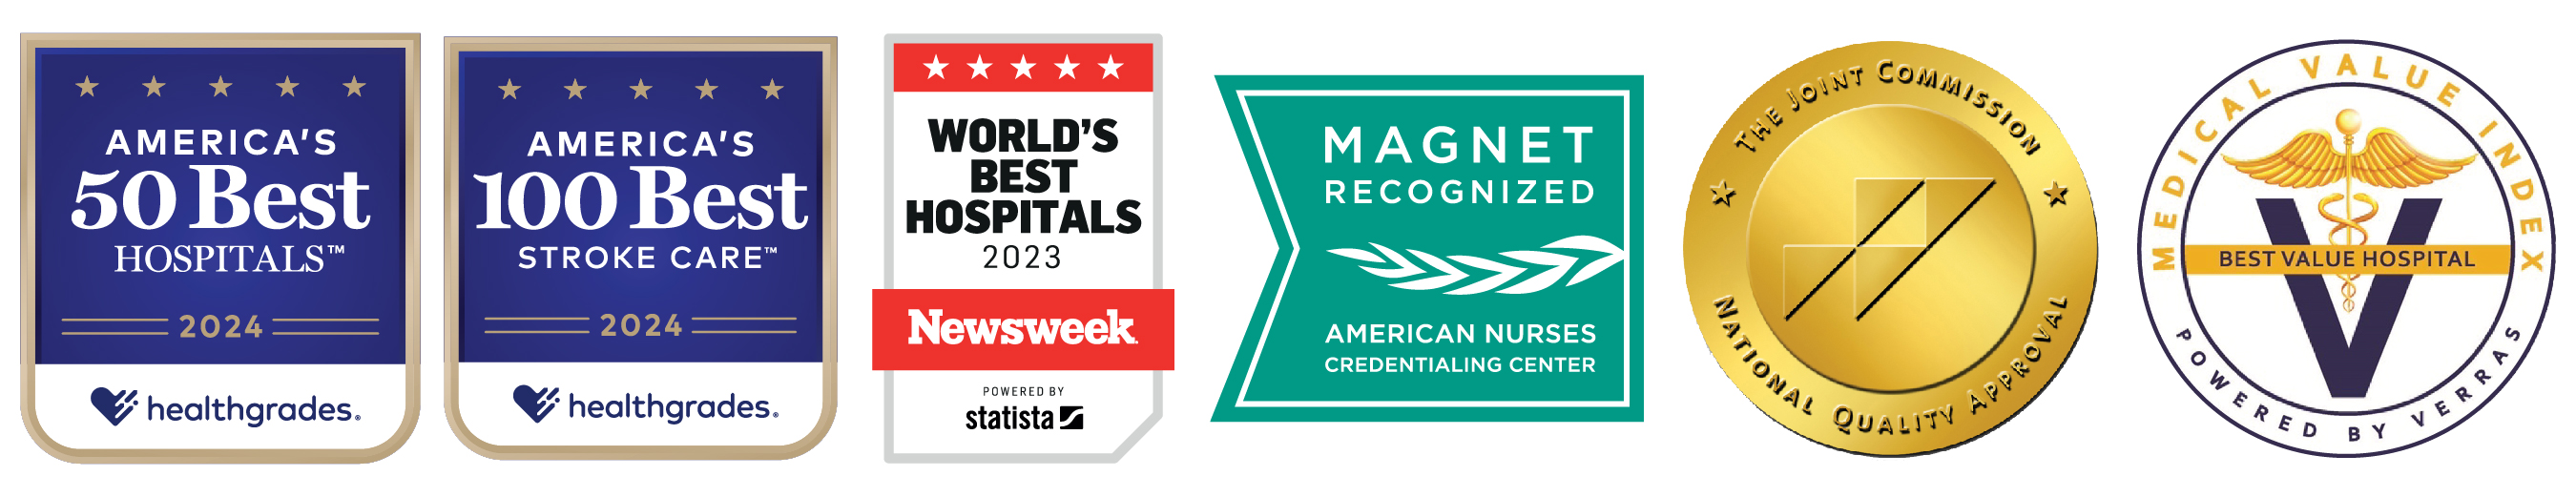 Healthgrades America's 50 Best Hospitals 2024, Healthgrades America's 100 Best Hospitals for Stroke Care 2024, Newsweek World's Best Hospitals 2023, Magnet Reconized by American Nurses Credentialing Center, The Joint Commission National Quality Approval Badge, and Verras Best Value Hospital